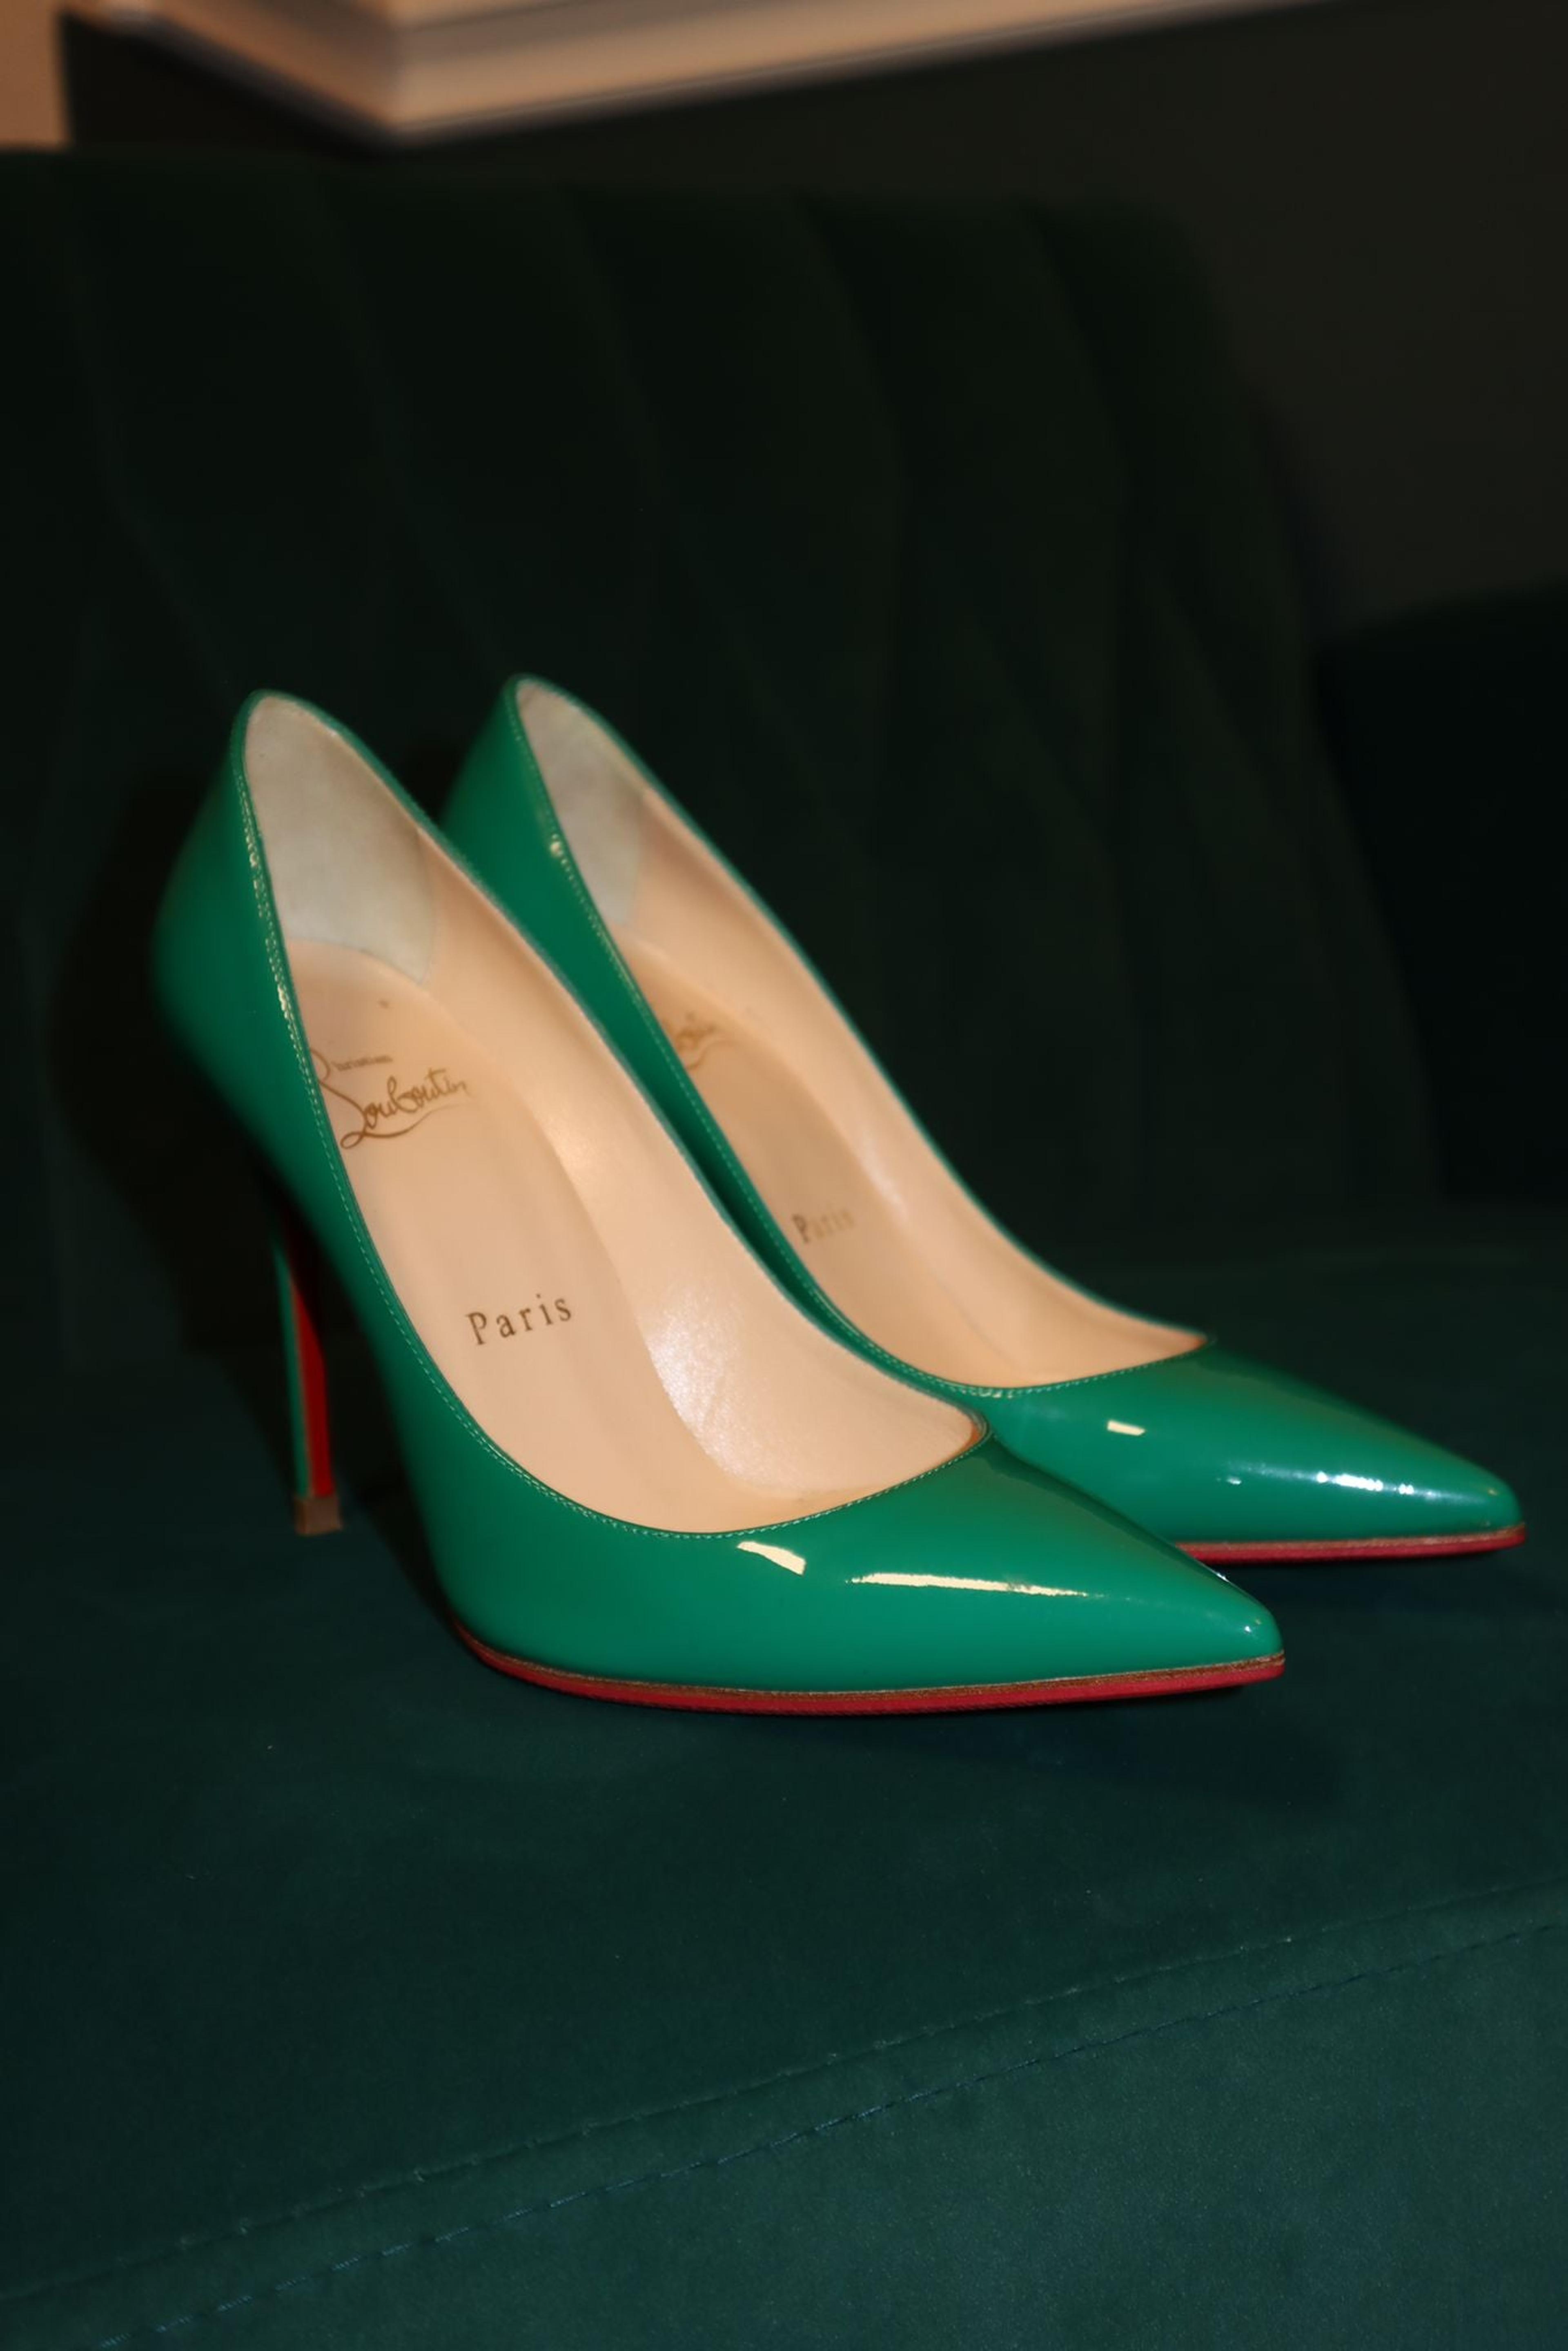 Alternate View 4 of Christian Louboutin Green Patent Leather Kate Pumps 35.5